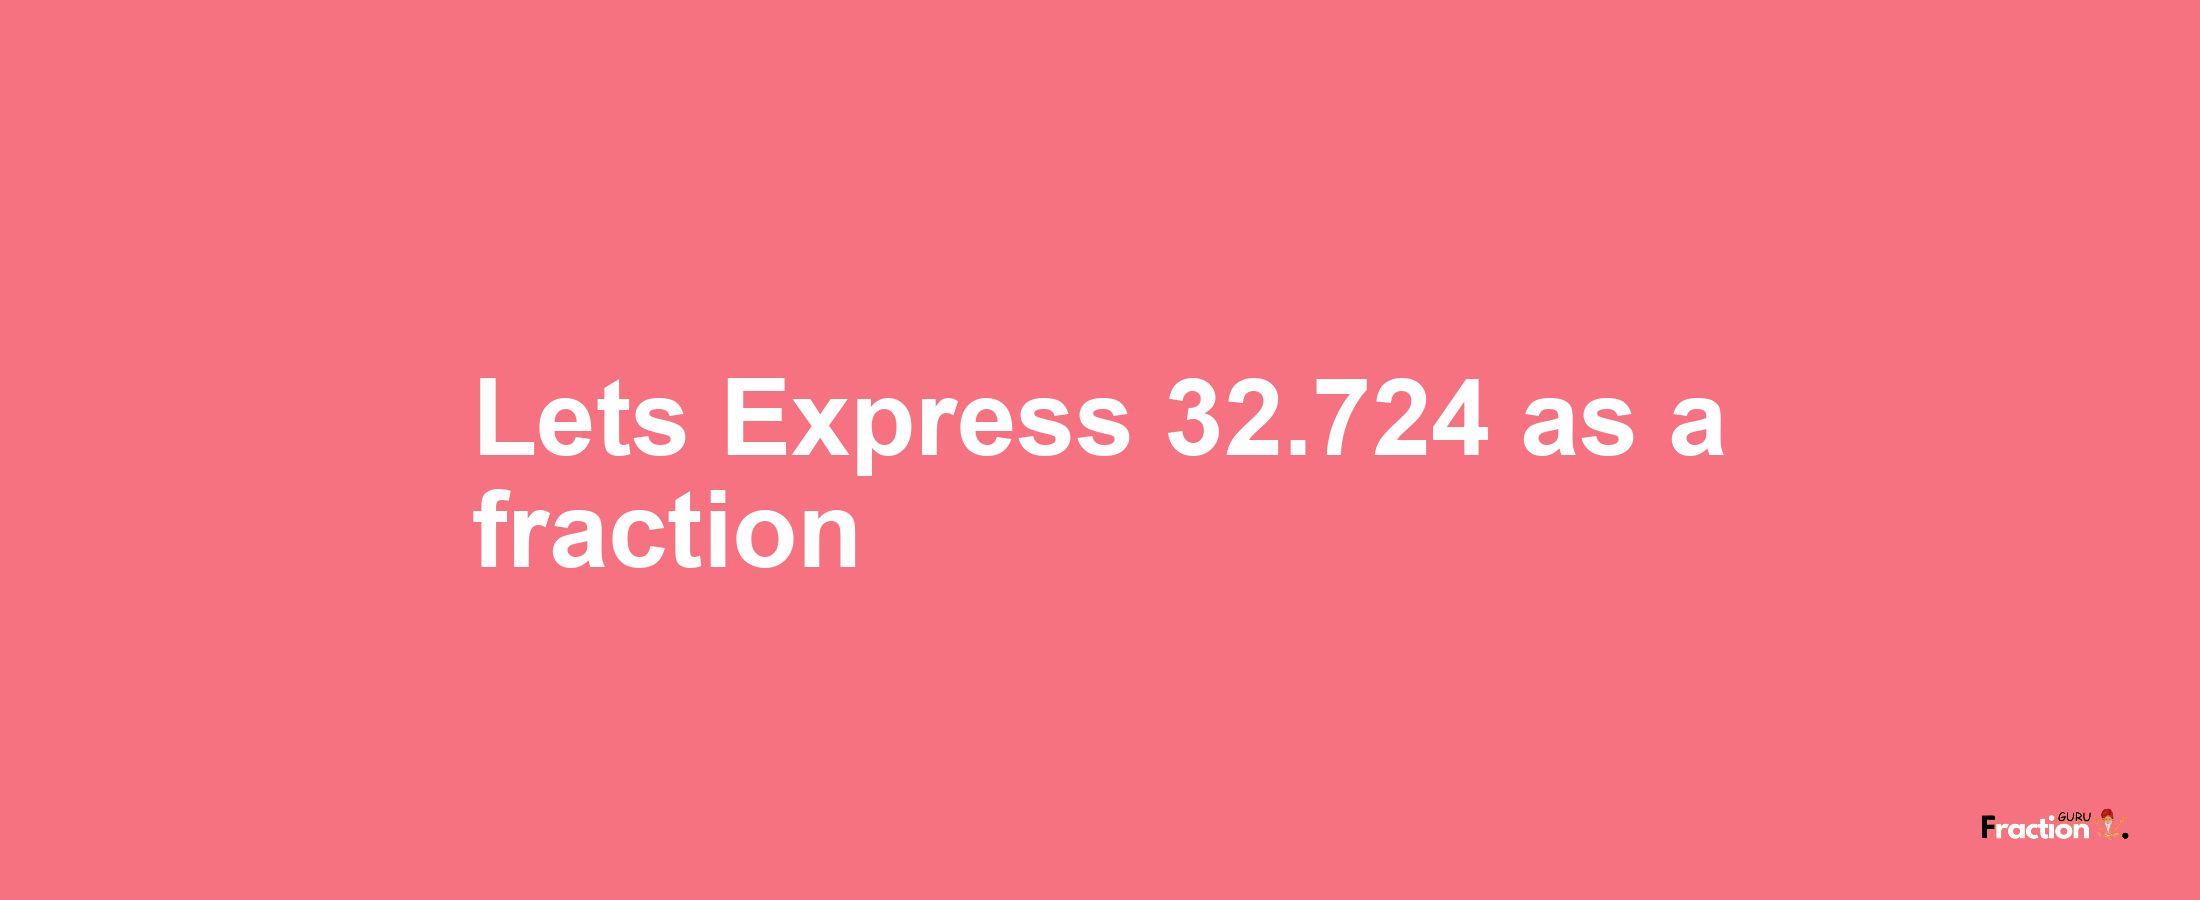 Lets Express 32.724 as afraction